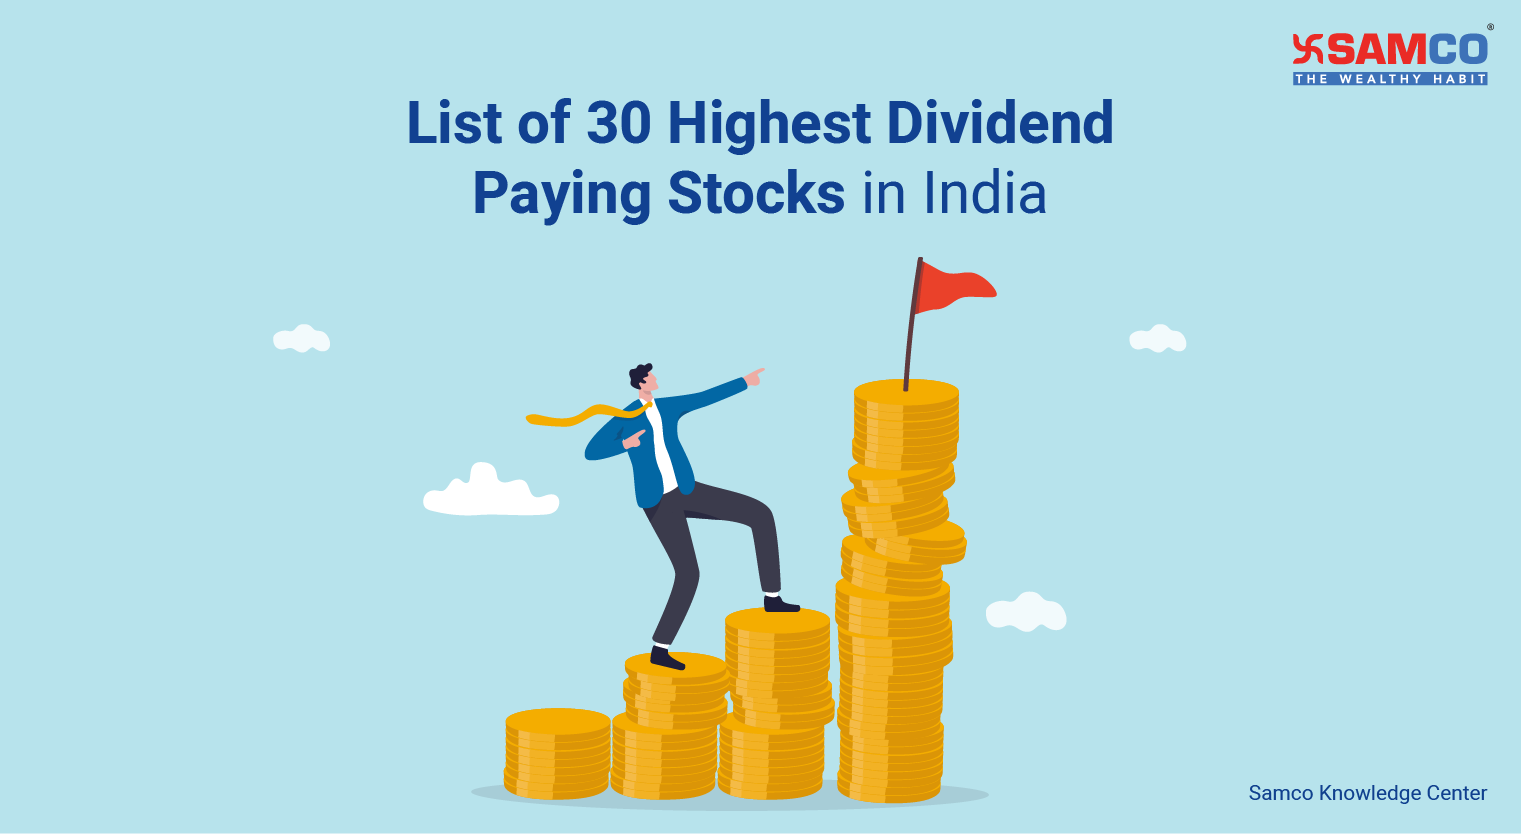 List of 30 Highest Dividend Paying Stocks in India